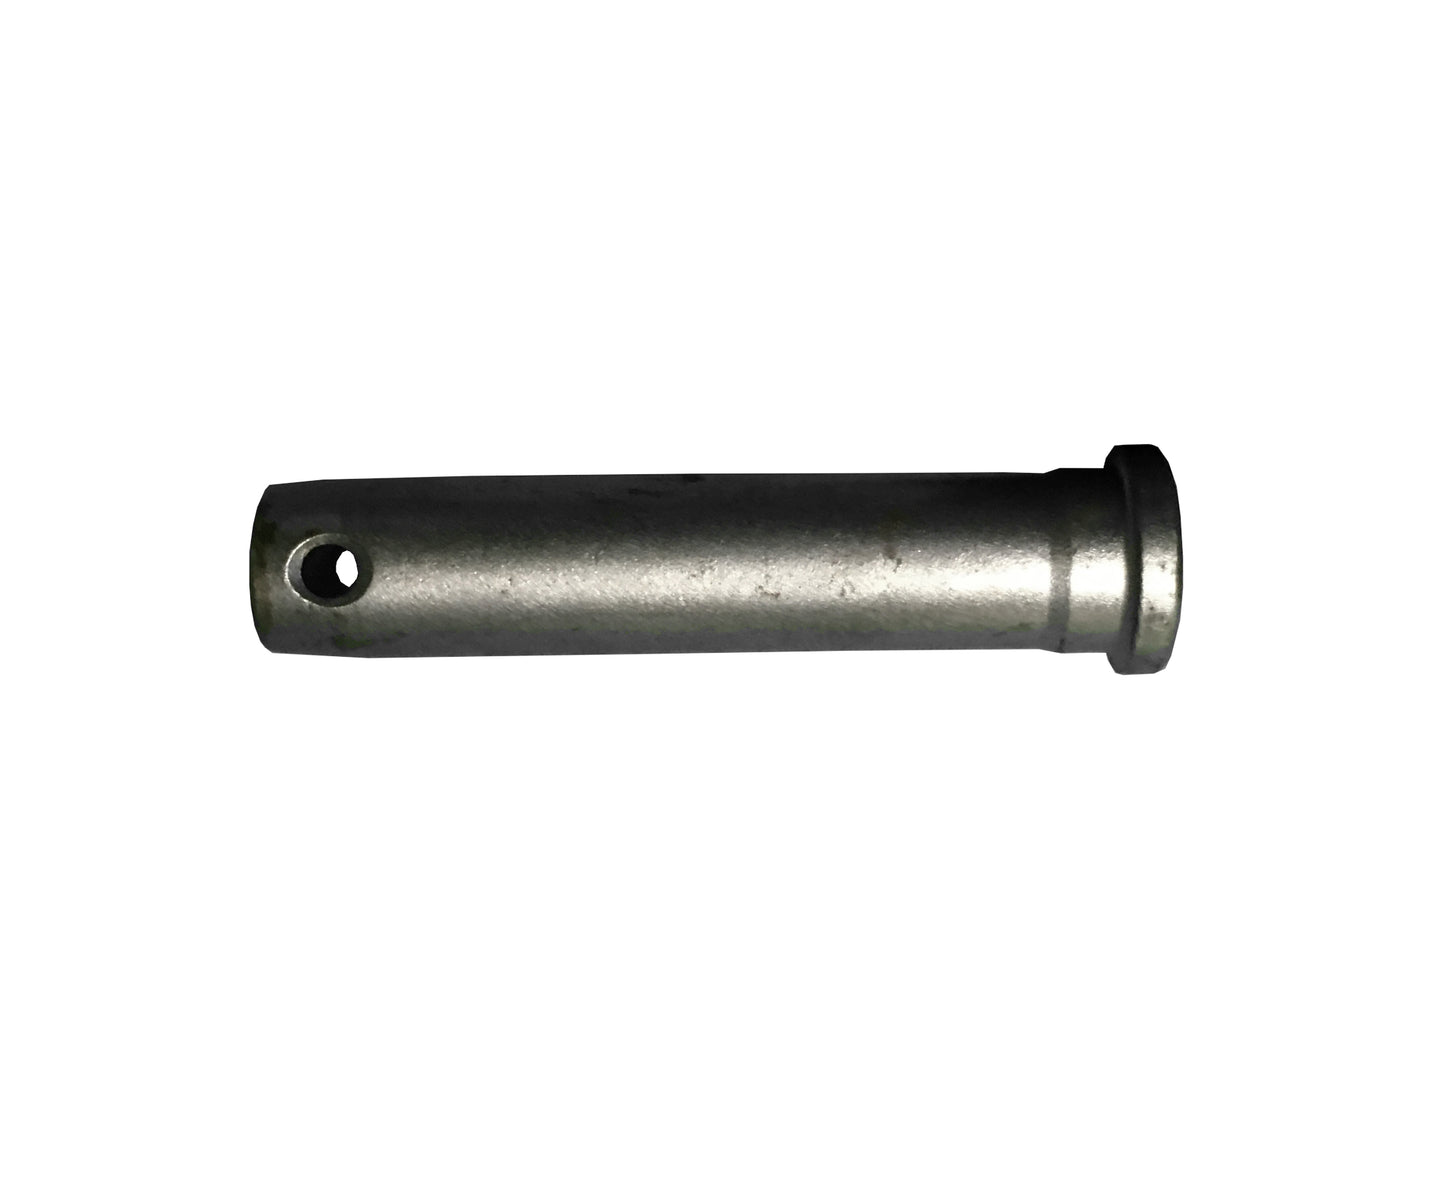 Trencher Repair Link w Pins, fits Many Small Chain trenchers w/ 1.654" Pitch